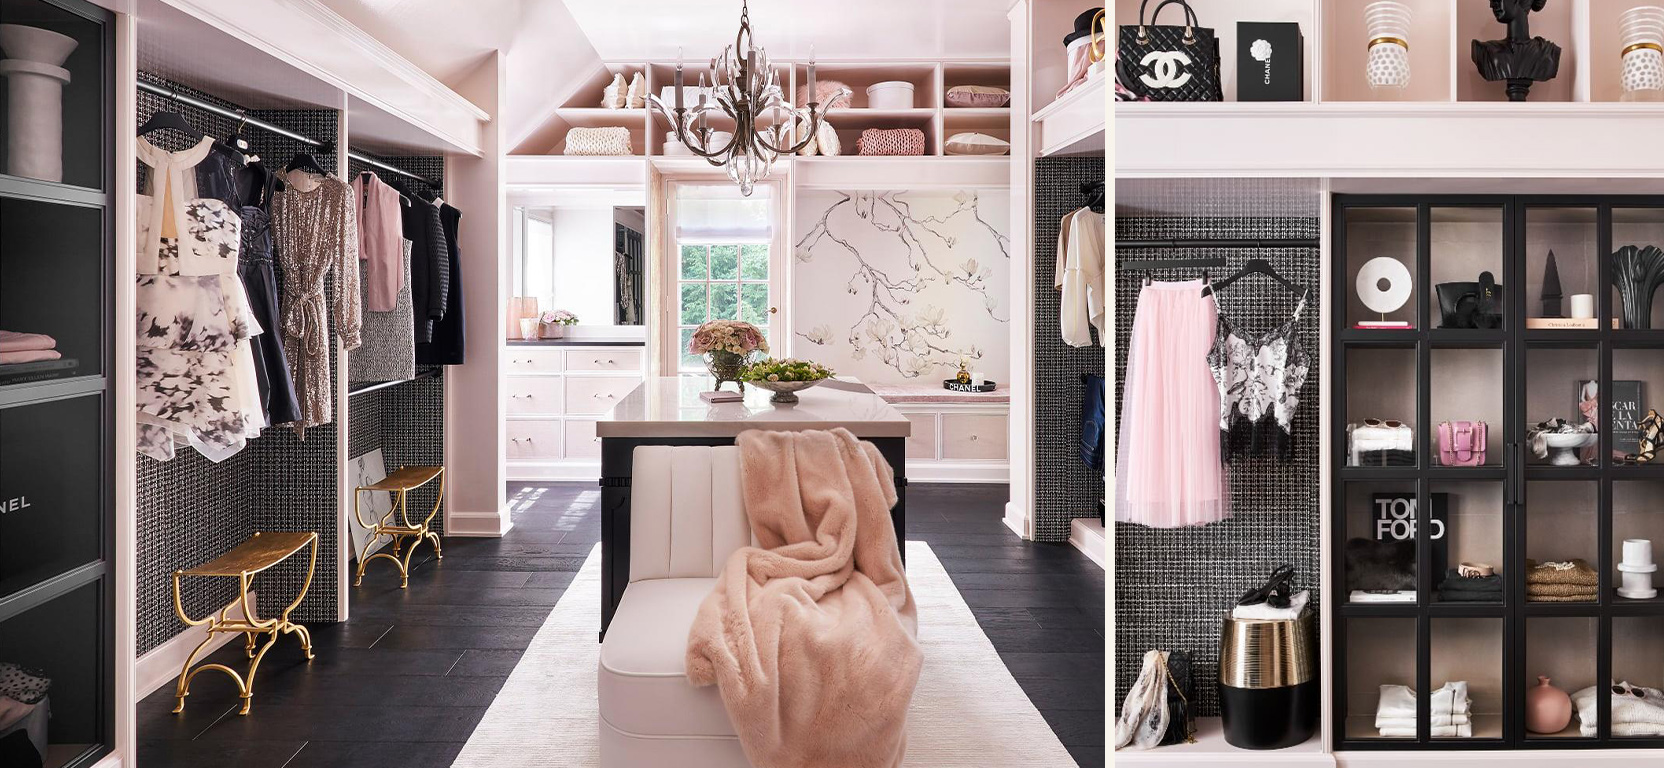 Left, a large sunlit walk-in closet with pastel pink walls, clothing racks, elegant chandelier, and mural of a branch on one wall. Right, a Detail shot of pink Chanel-inspired closet with neatly displayed clothes and accessories on black shelving. 